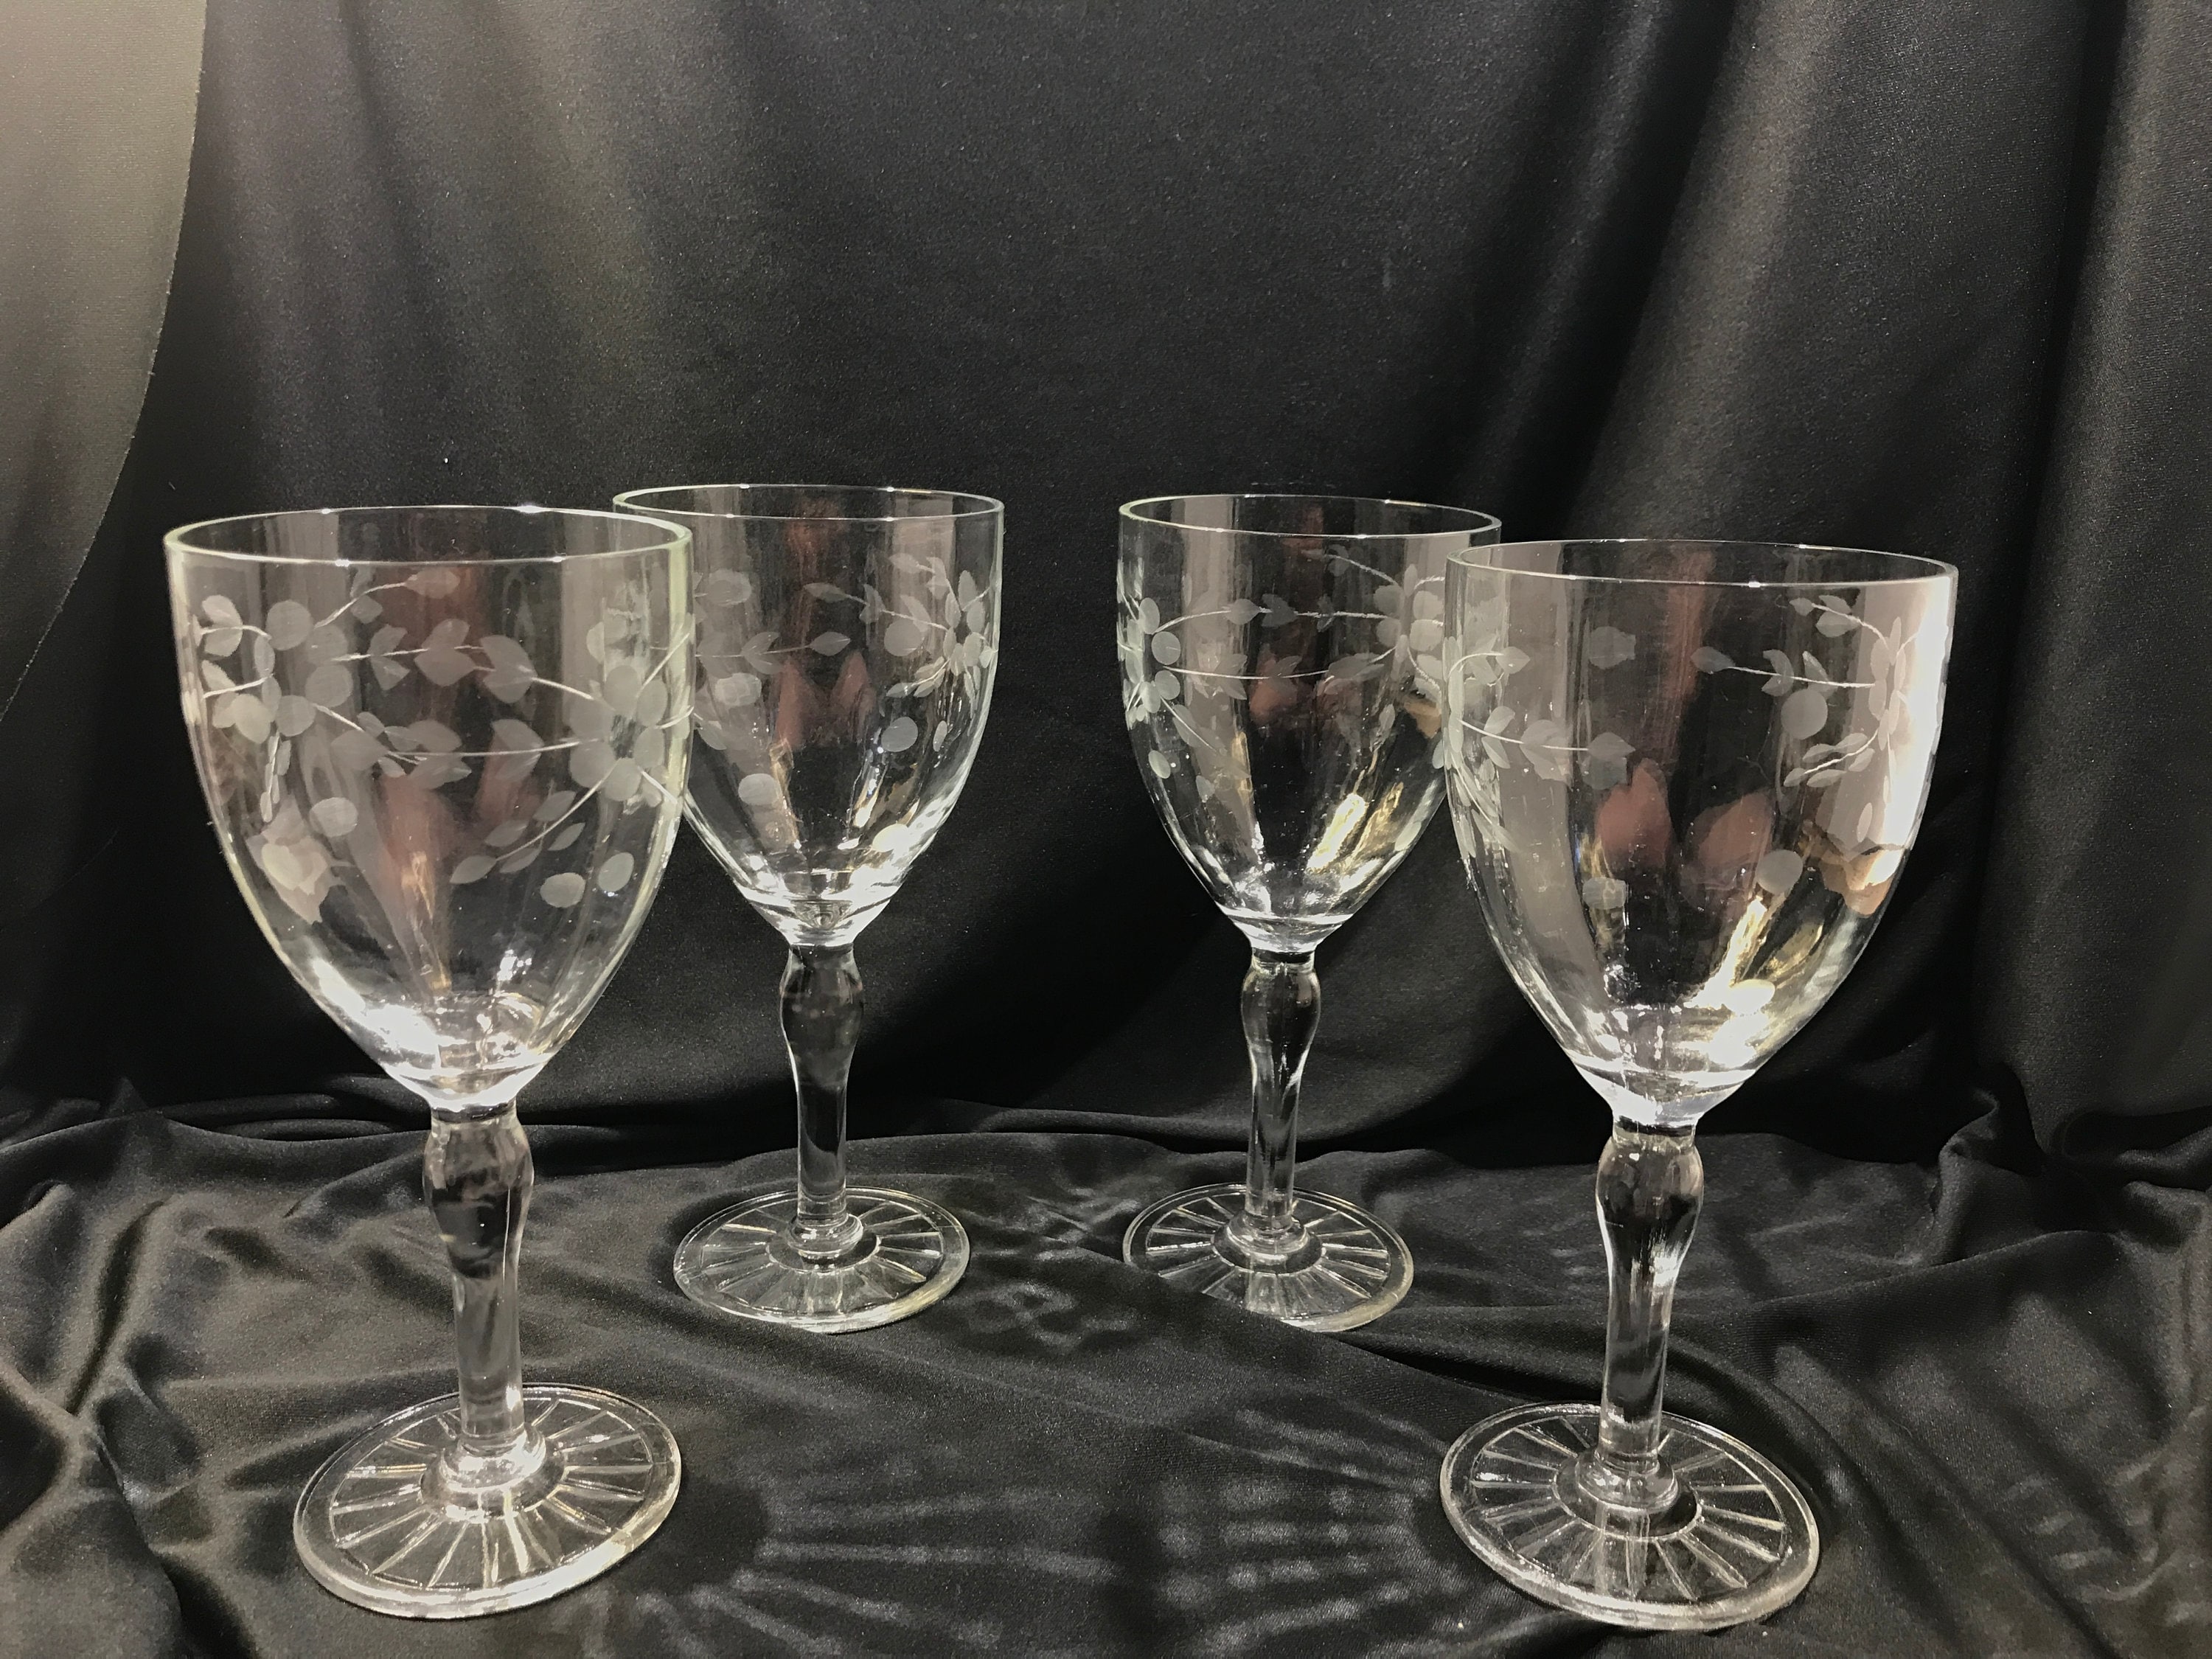 Vintage Etched Stars Clear Glass Ice-Tea / Water Glasses Set of 3